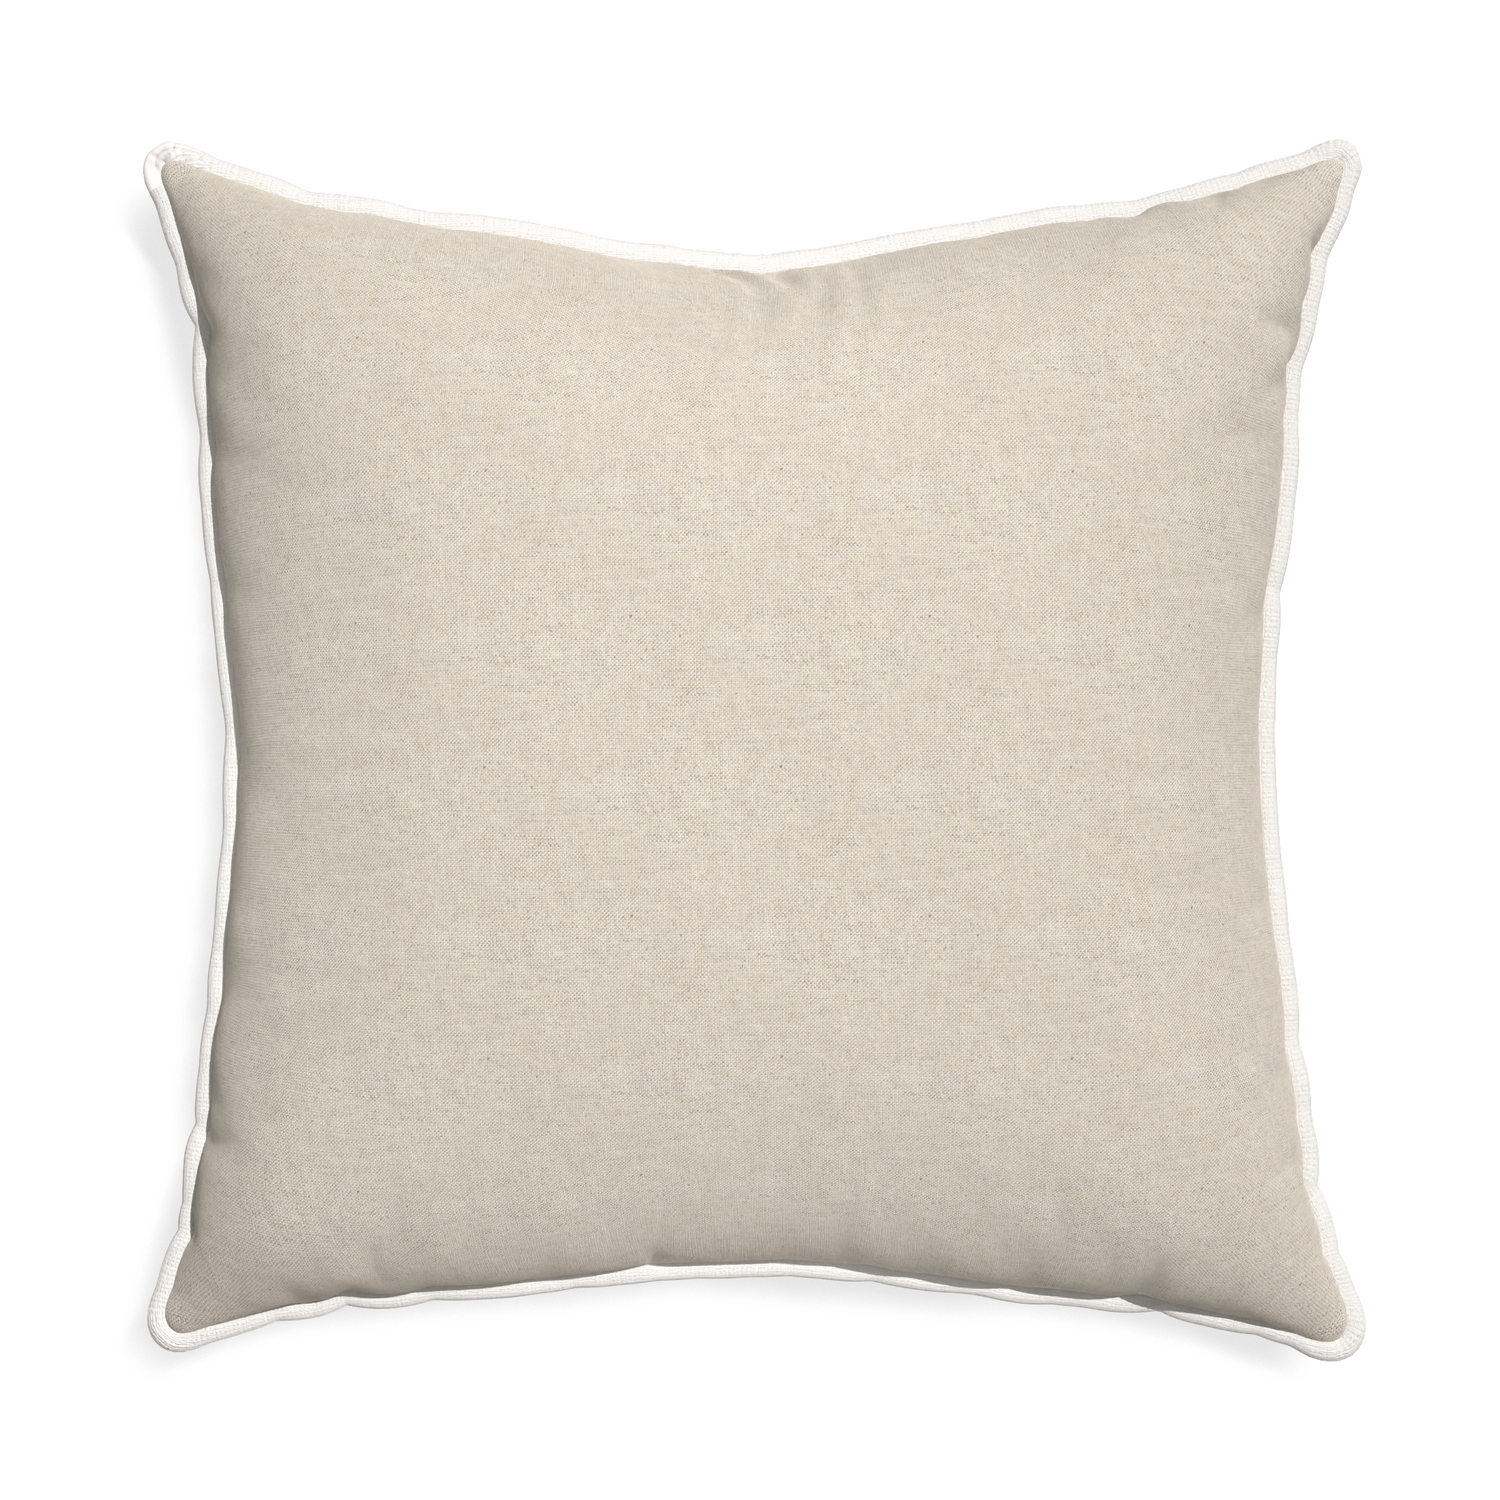 Euro-sham oat custom pillow with snow piping on white background